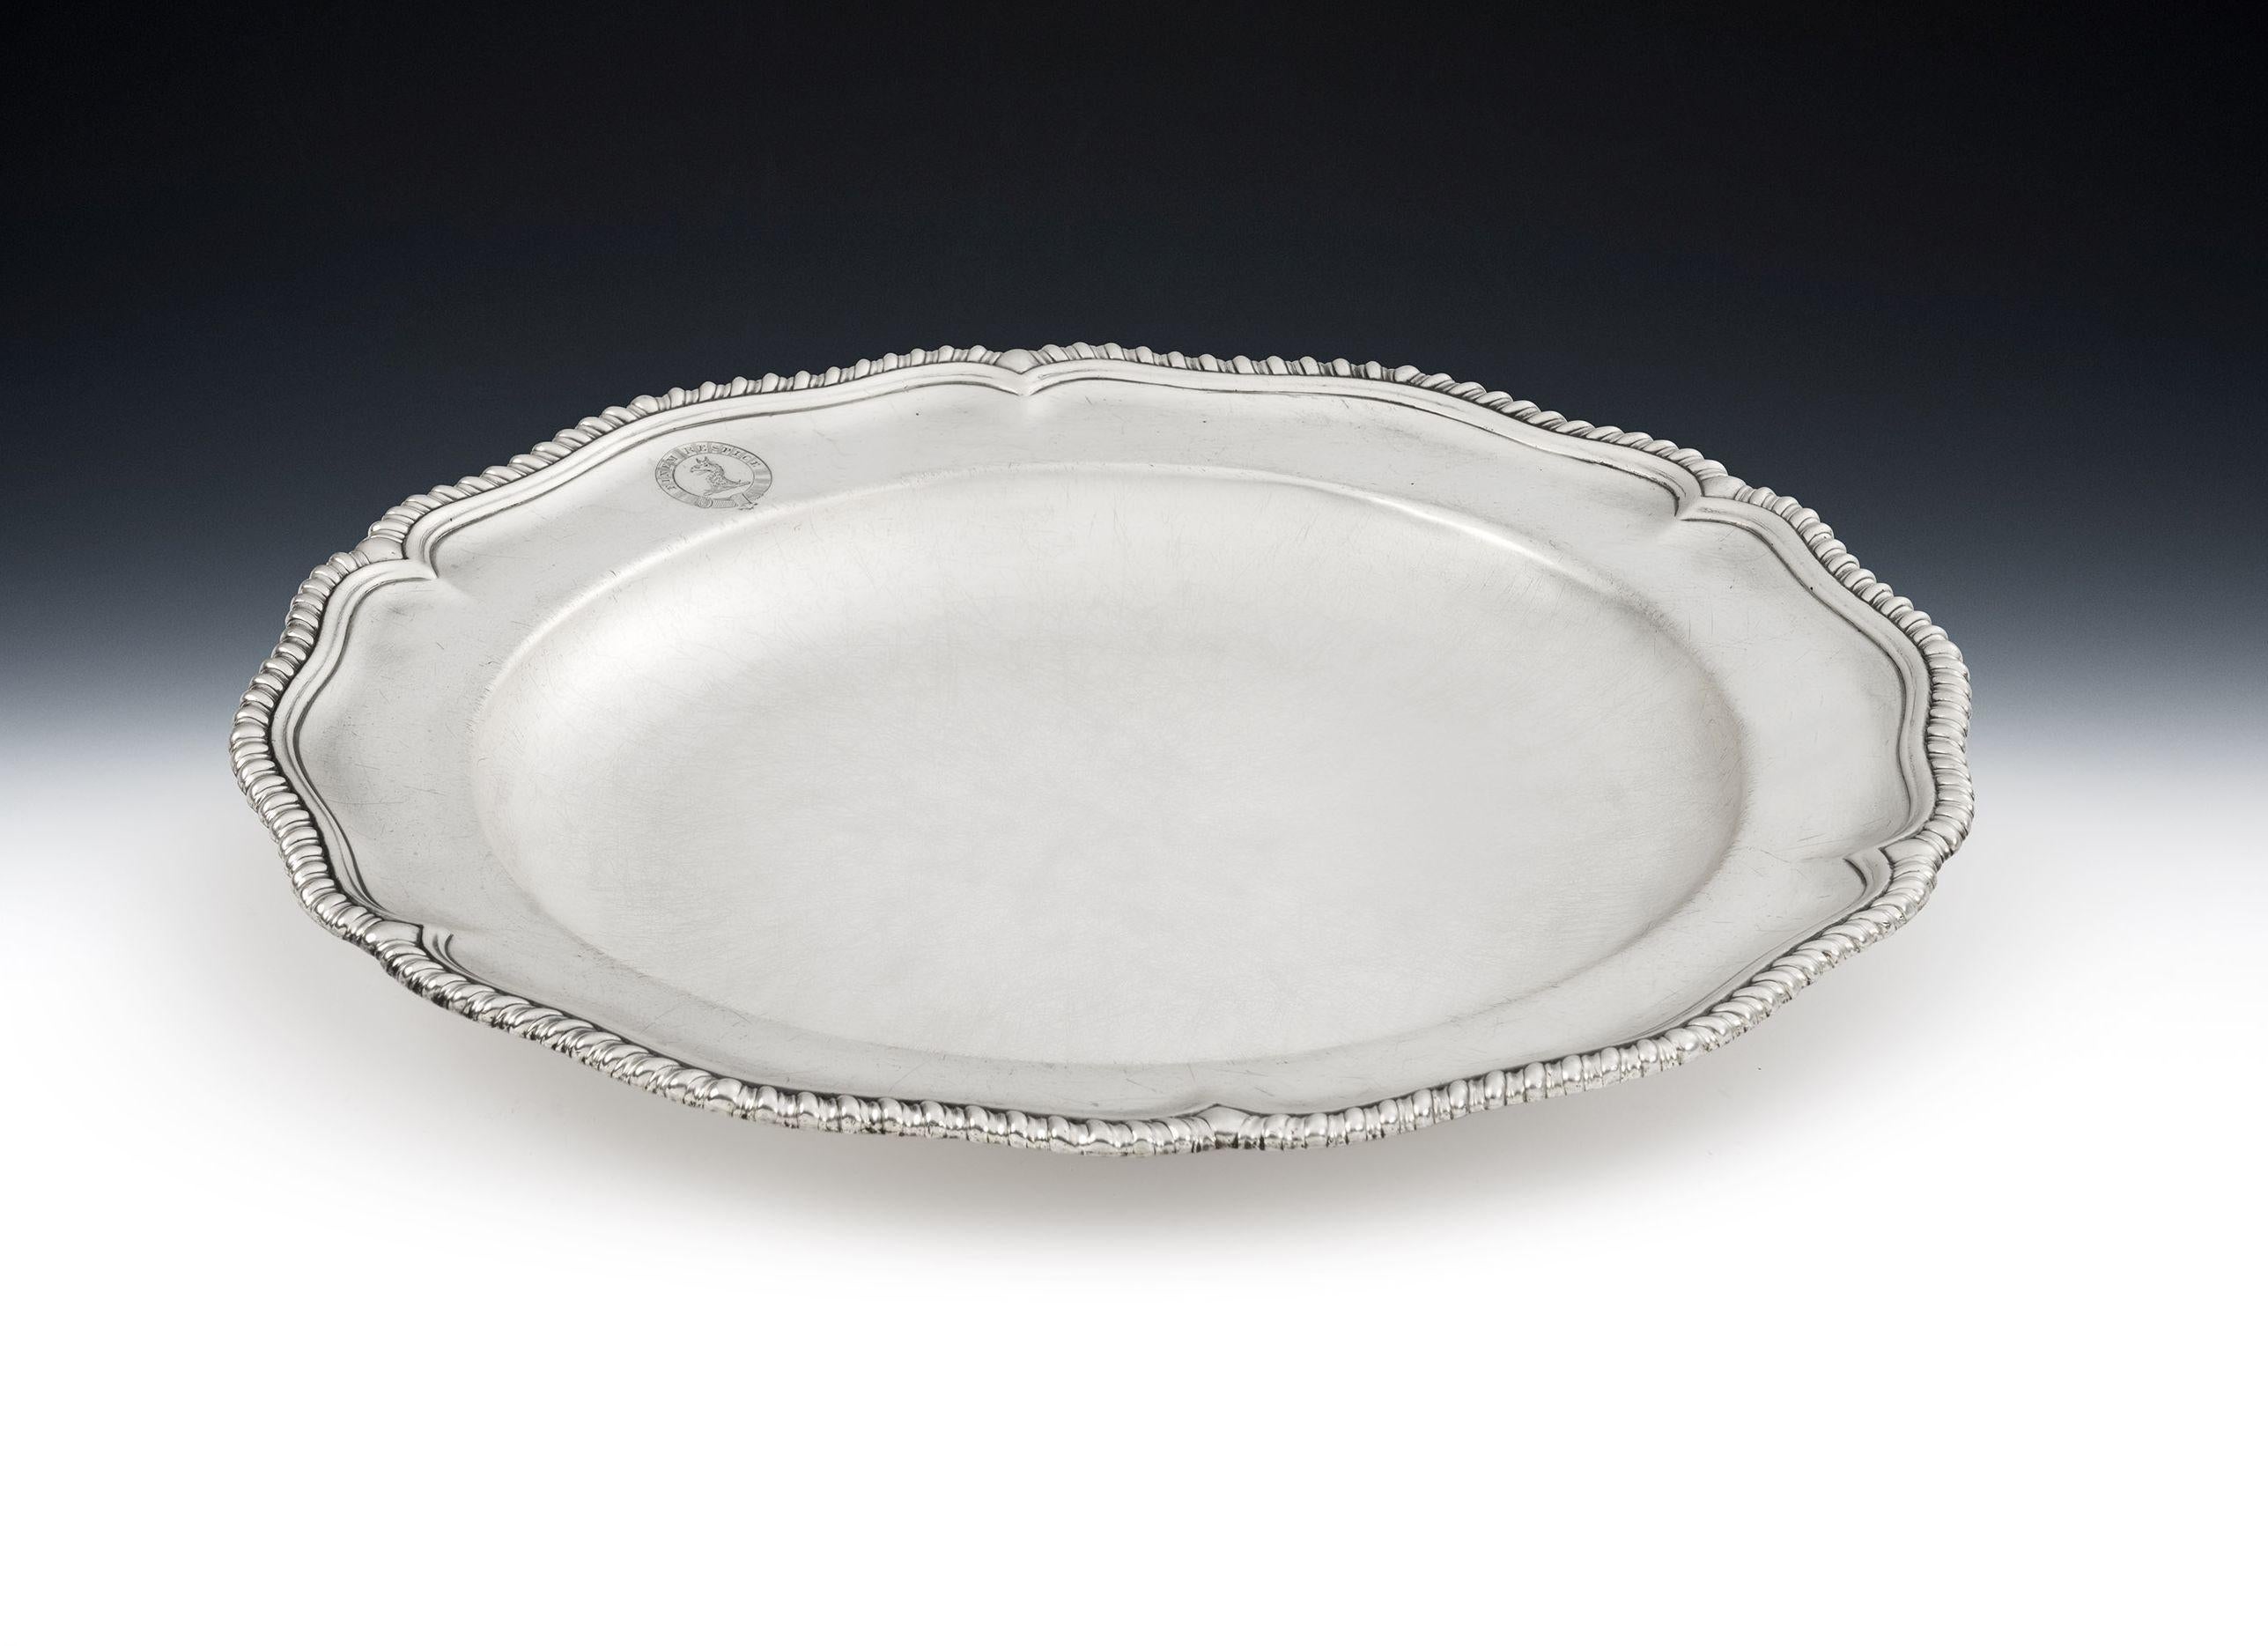 British Pair of George II Serving Dishes Made in London in 1759 by William Cripps For Sale